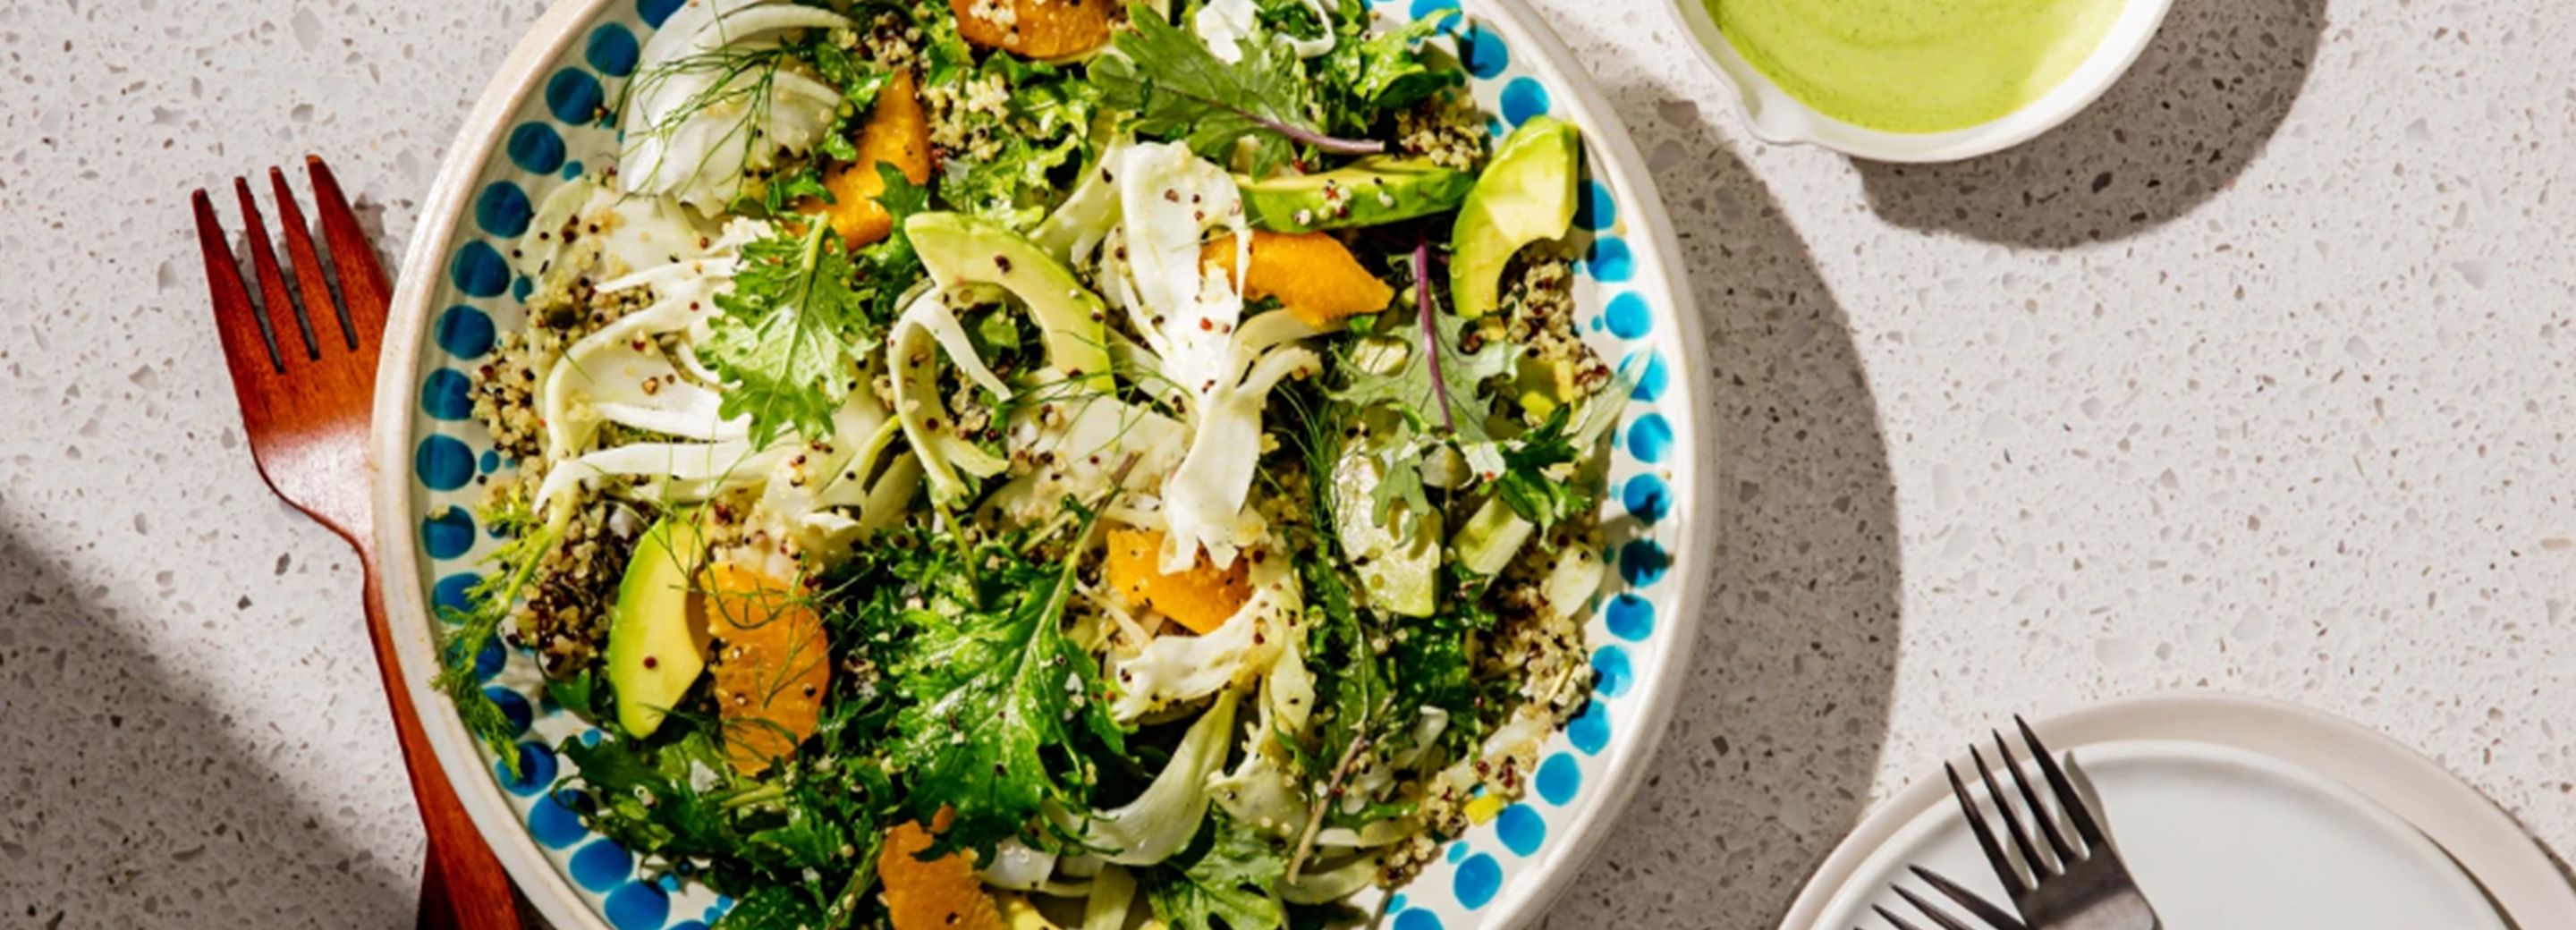 Kale Salad with Creamy Herb Dressing